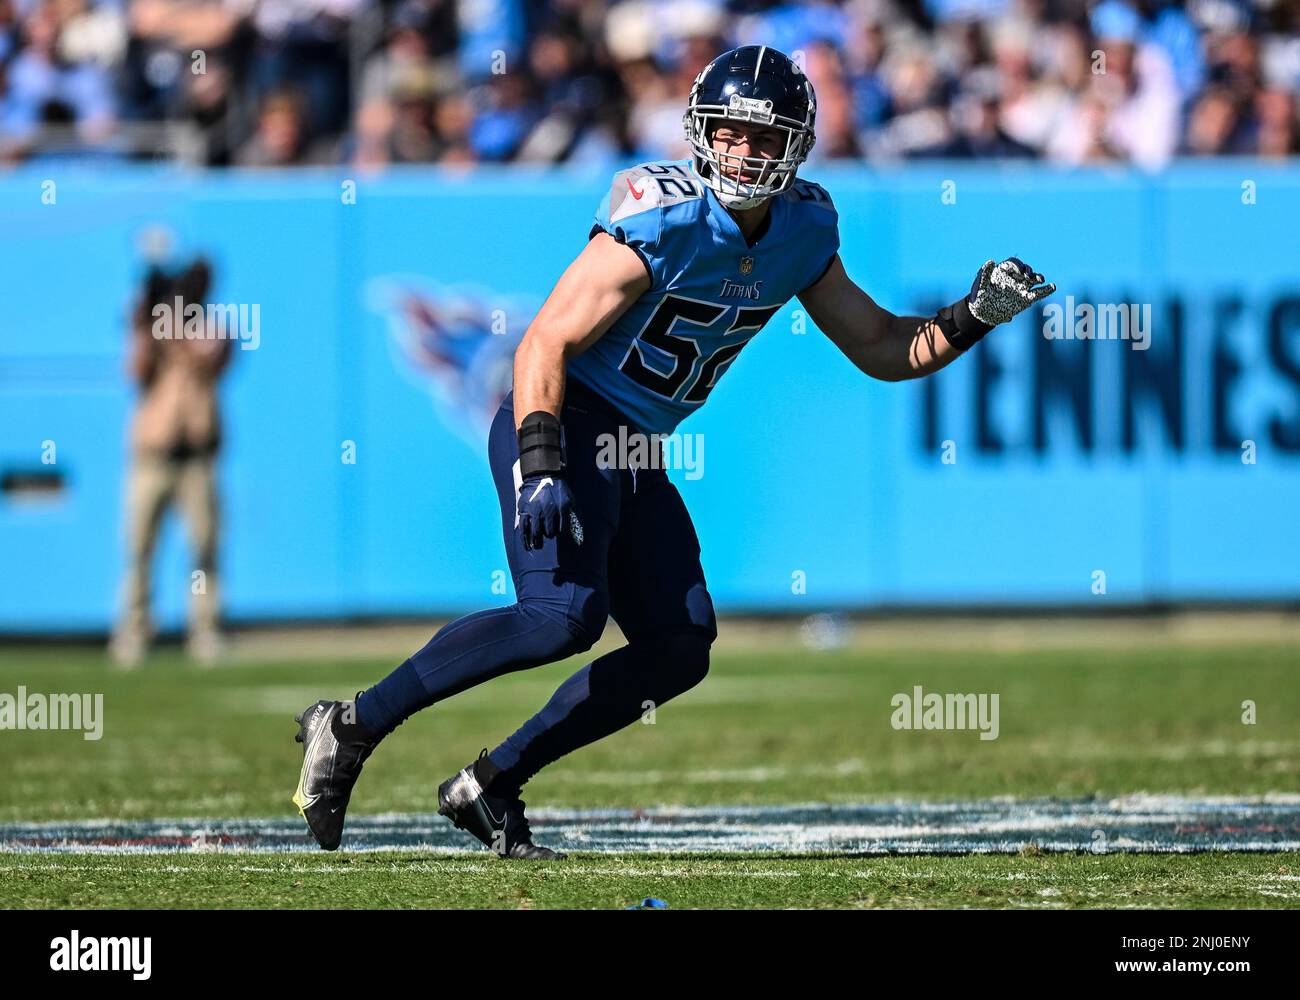 NASHVILLE, TN - OCTOBER 23: Tennessee Titans linebacker Joe Schobert (52)  prepares to defend during the Tennessee Titans game versus the Indianapolis  Colts on October 23, 2022, at Nissan Stadium in Nashville,